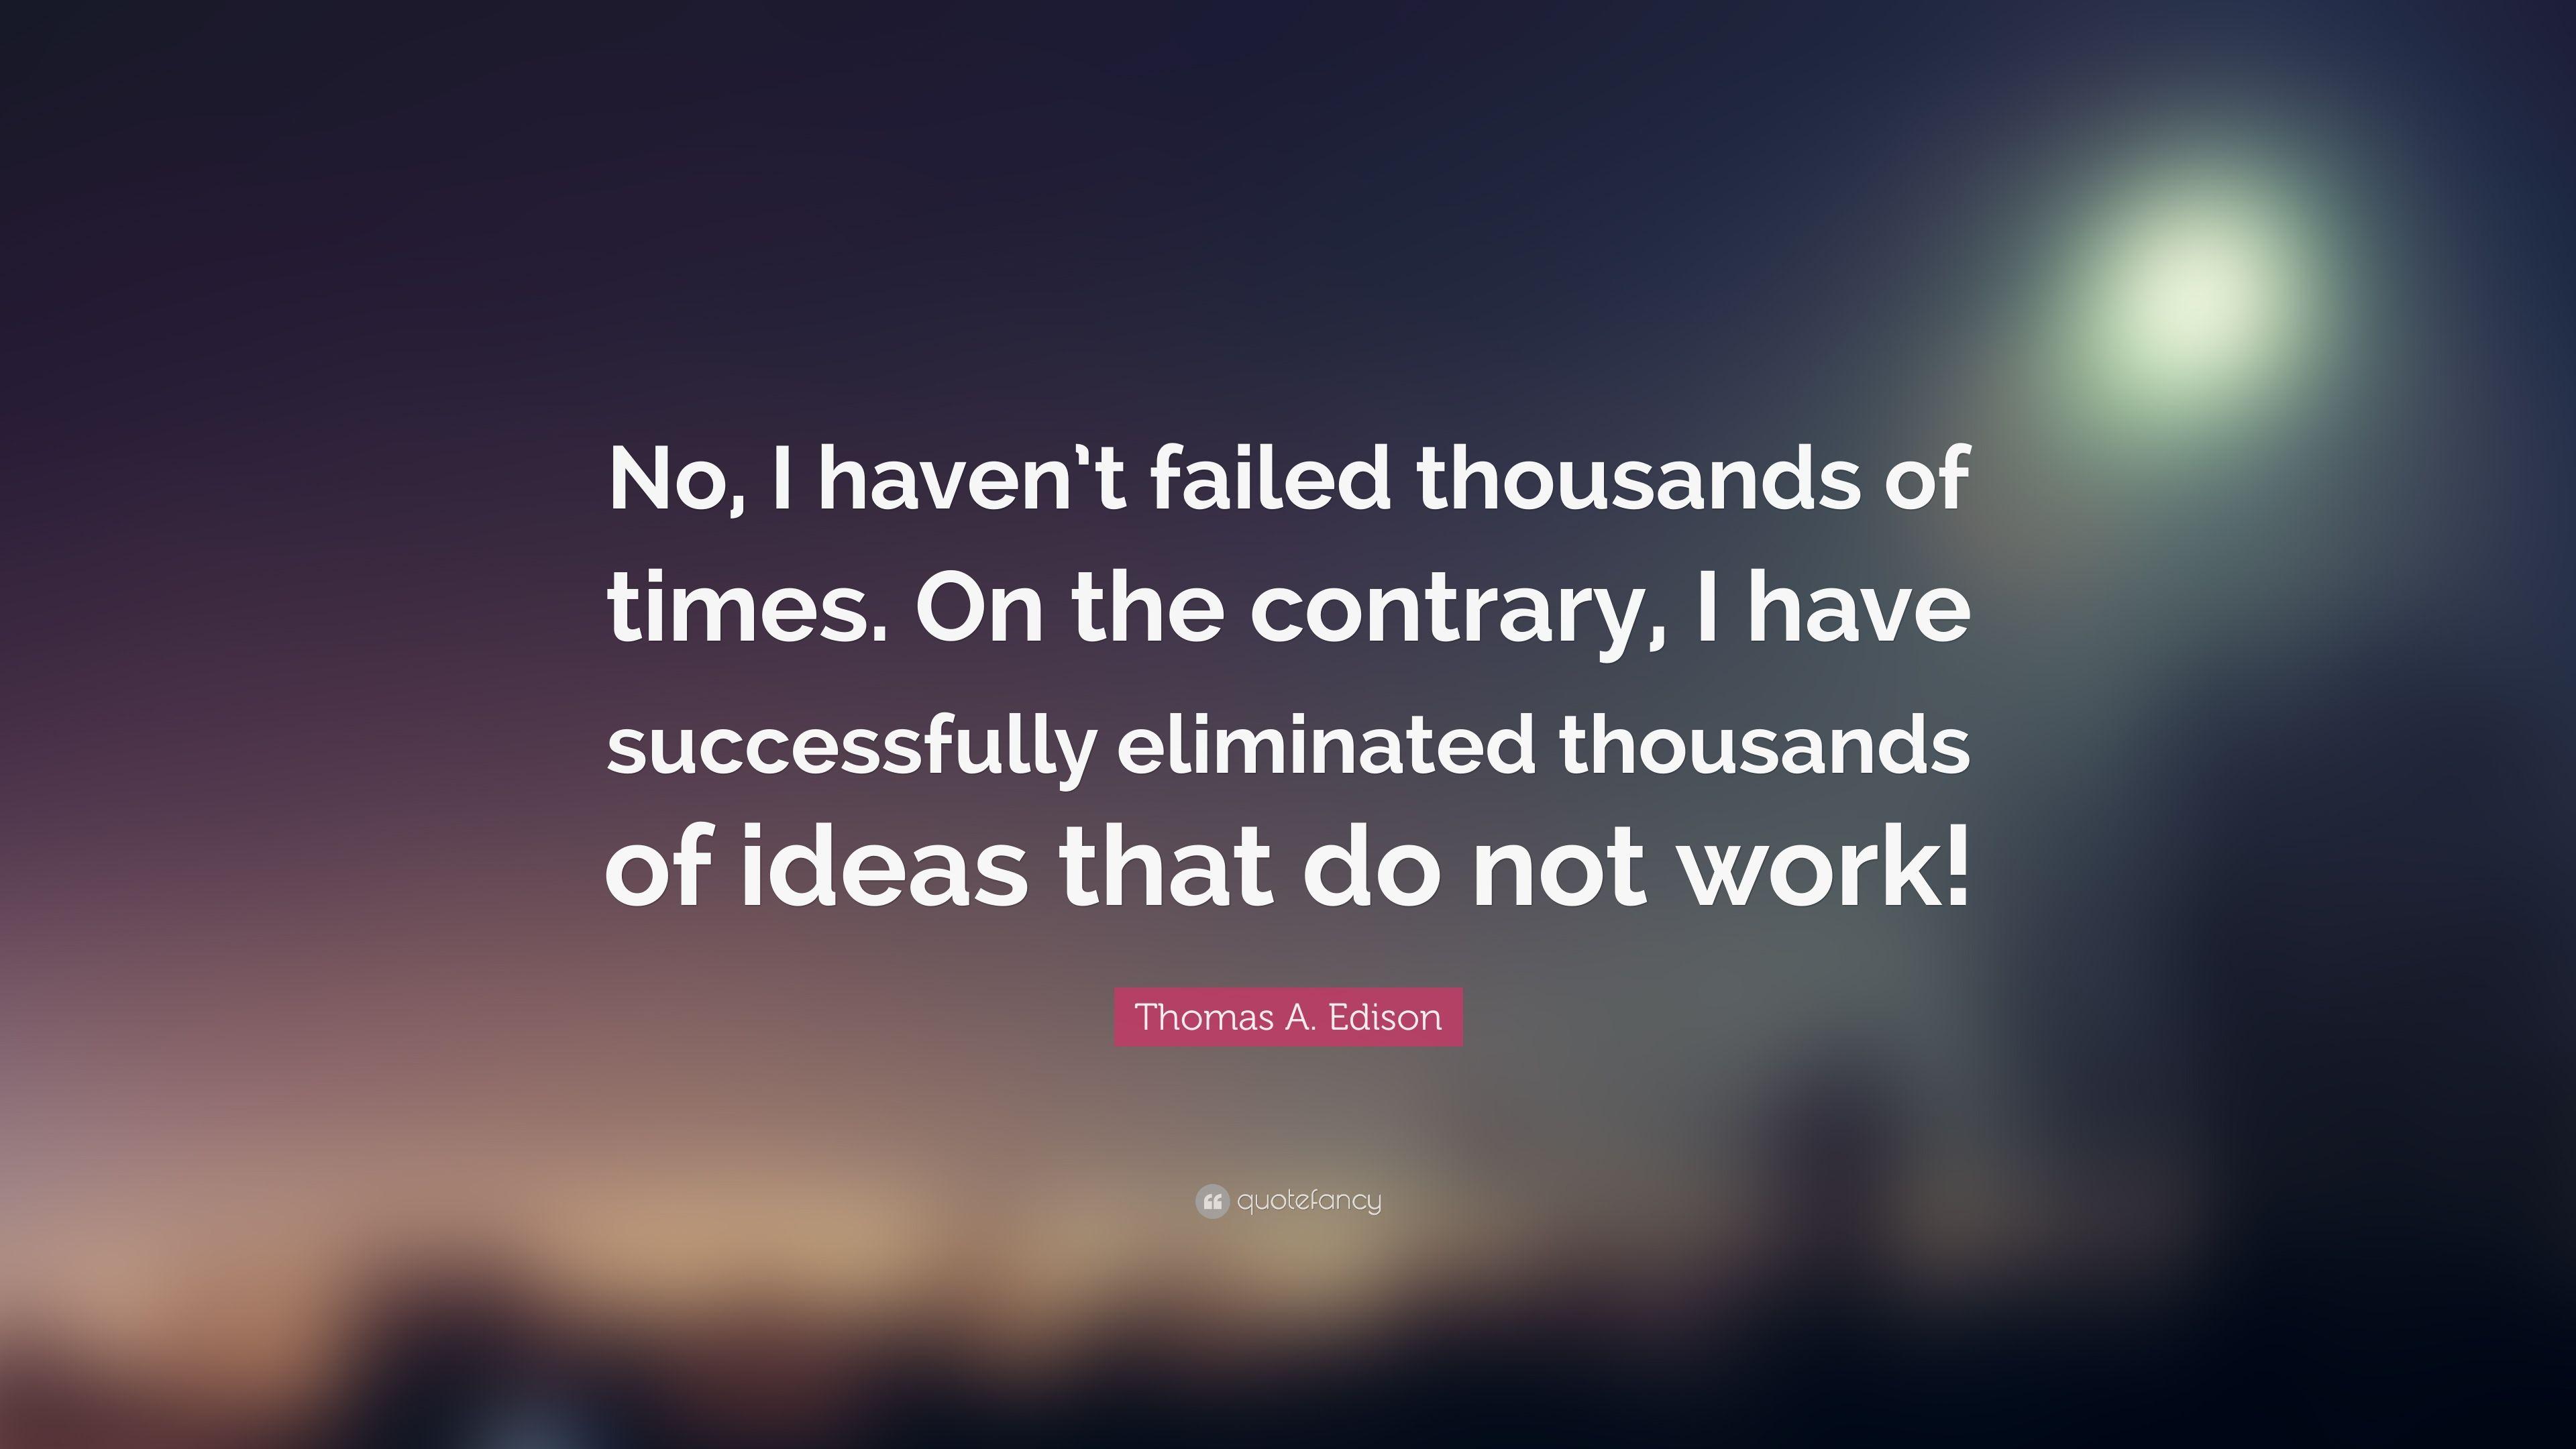 Thomas A. Edison Quote: “No, I haven't failed thousands of times